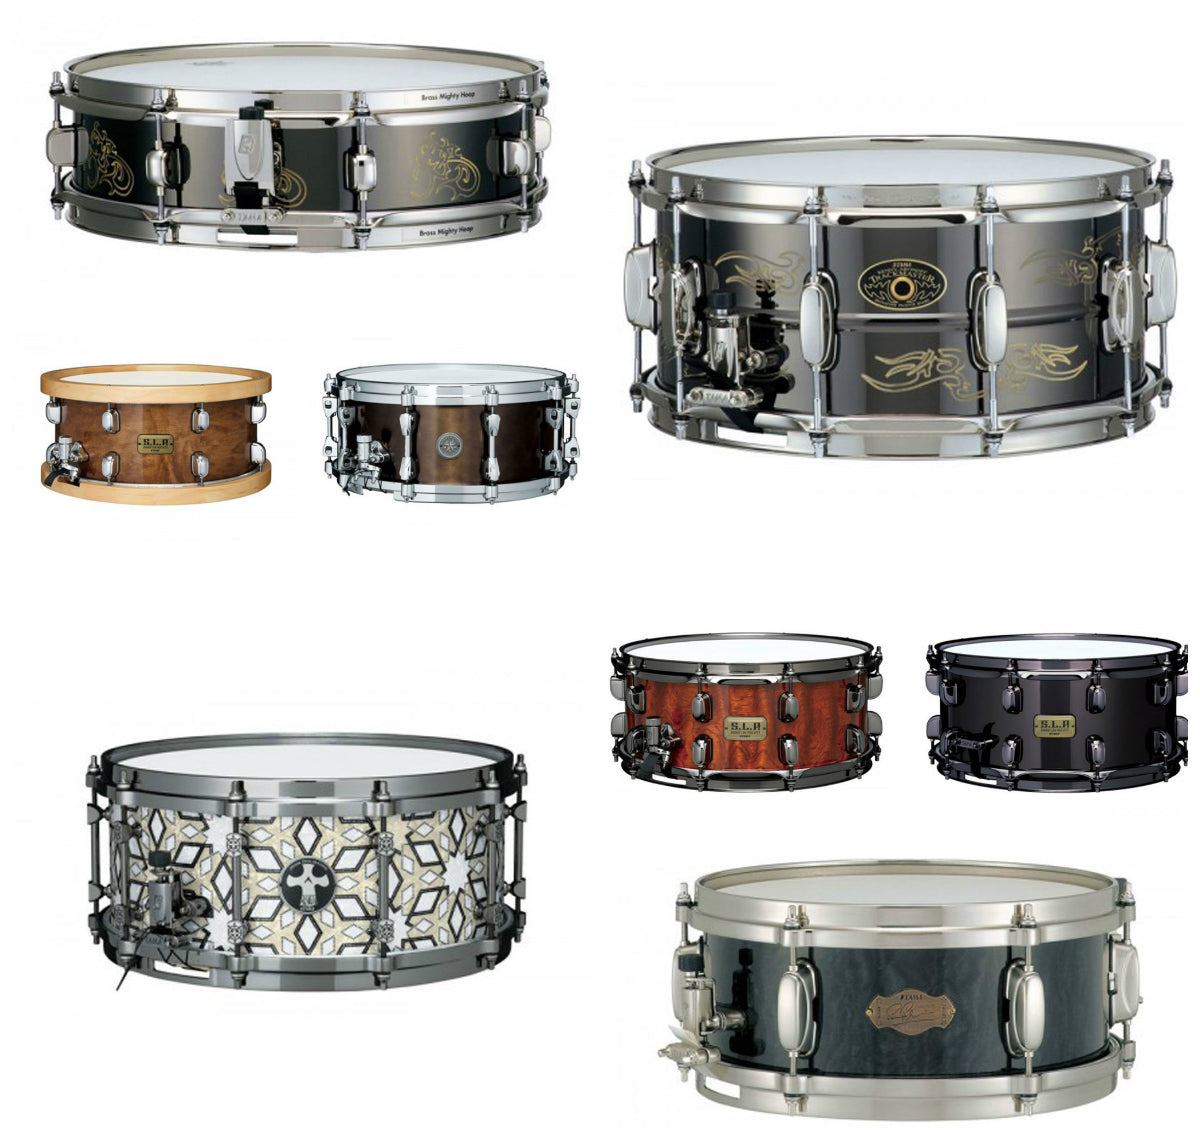 Snare Drums from Tama